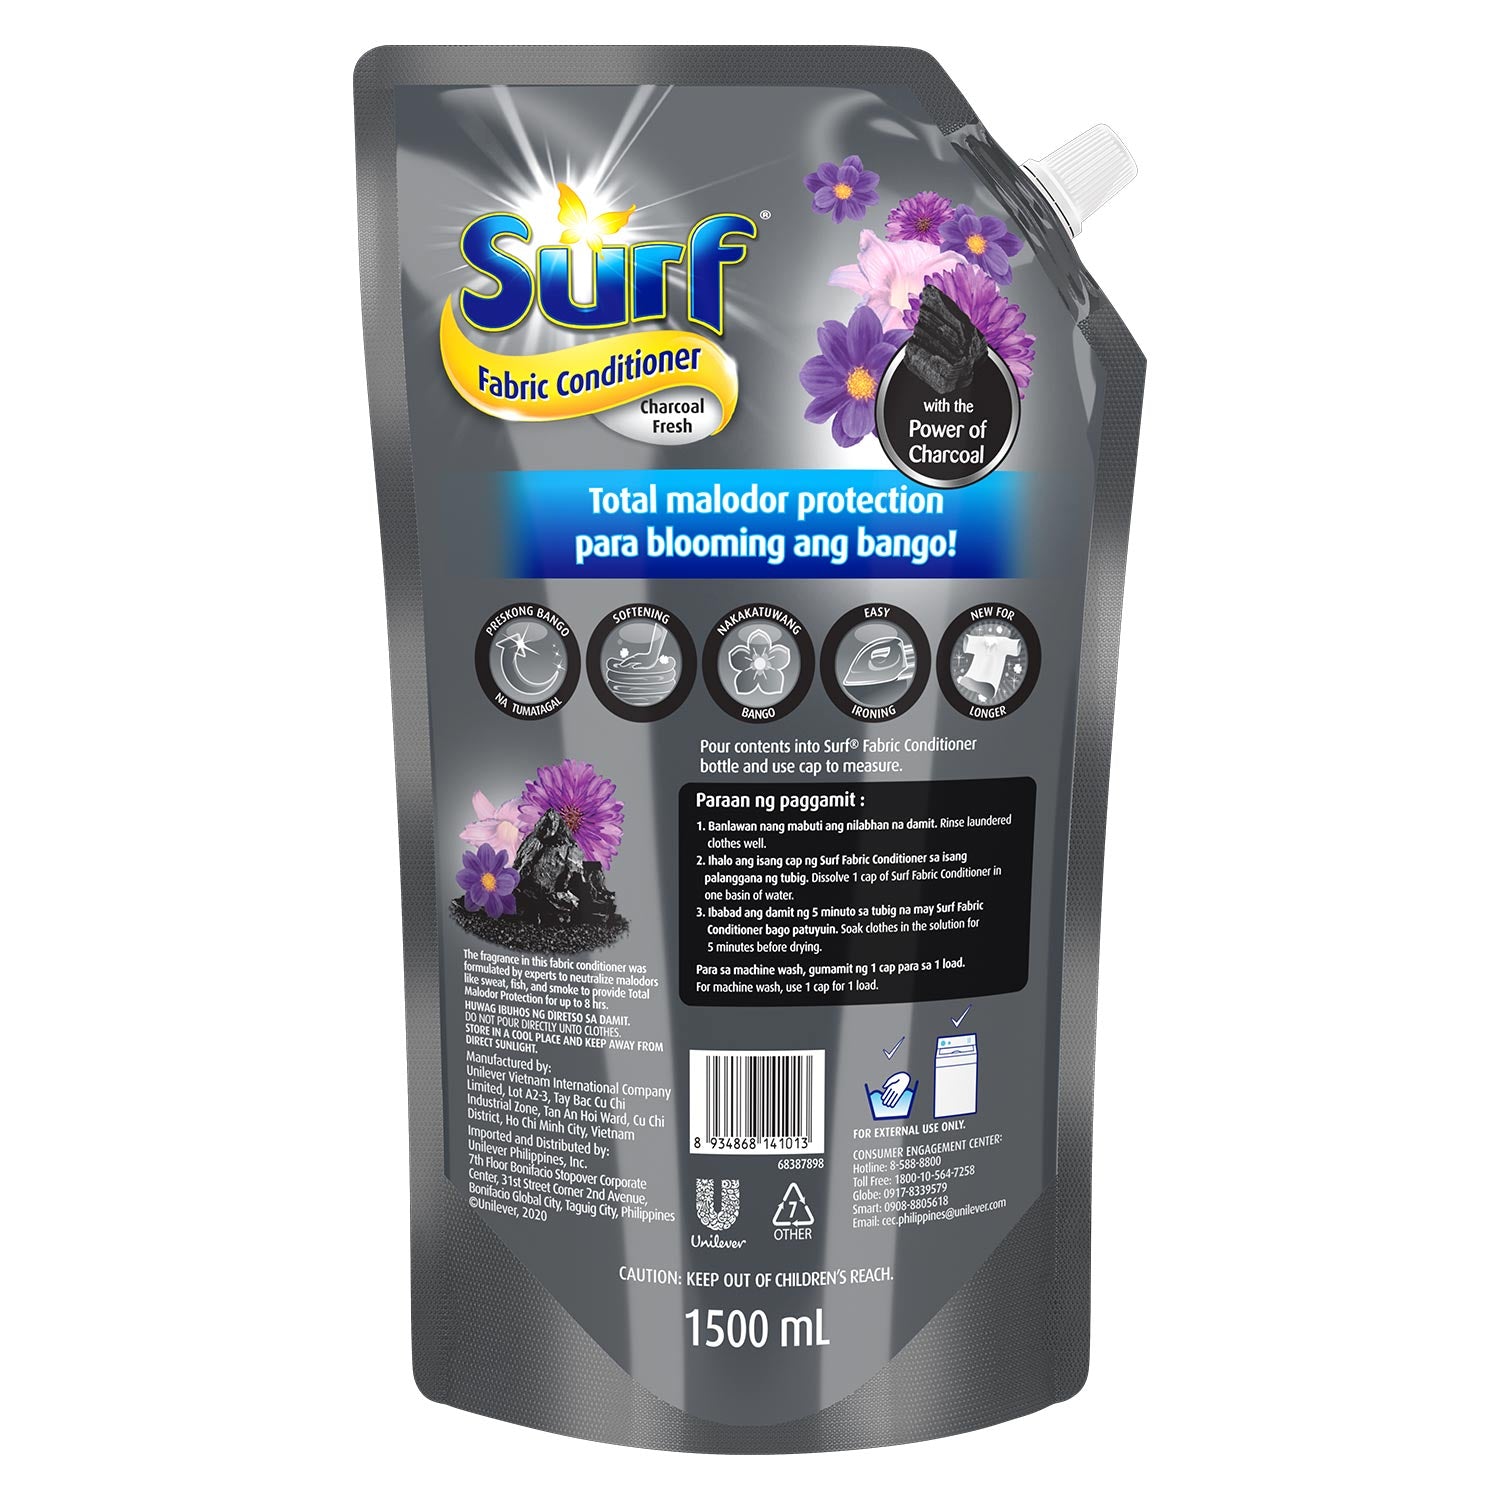 [BUNDLE] Surf Laundry Fabric Conditioner Charcoal Fresh 1480ml Pouch 3x